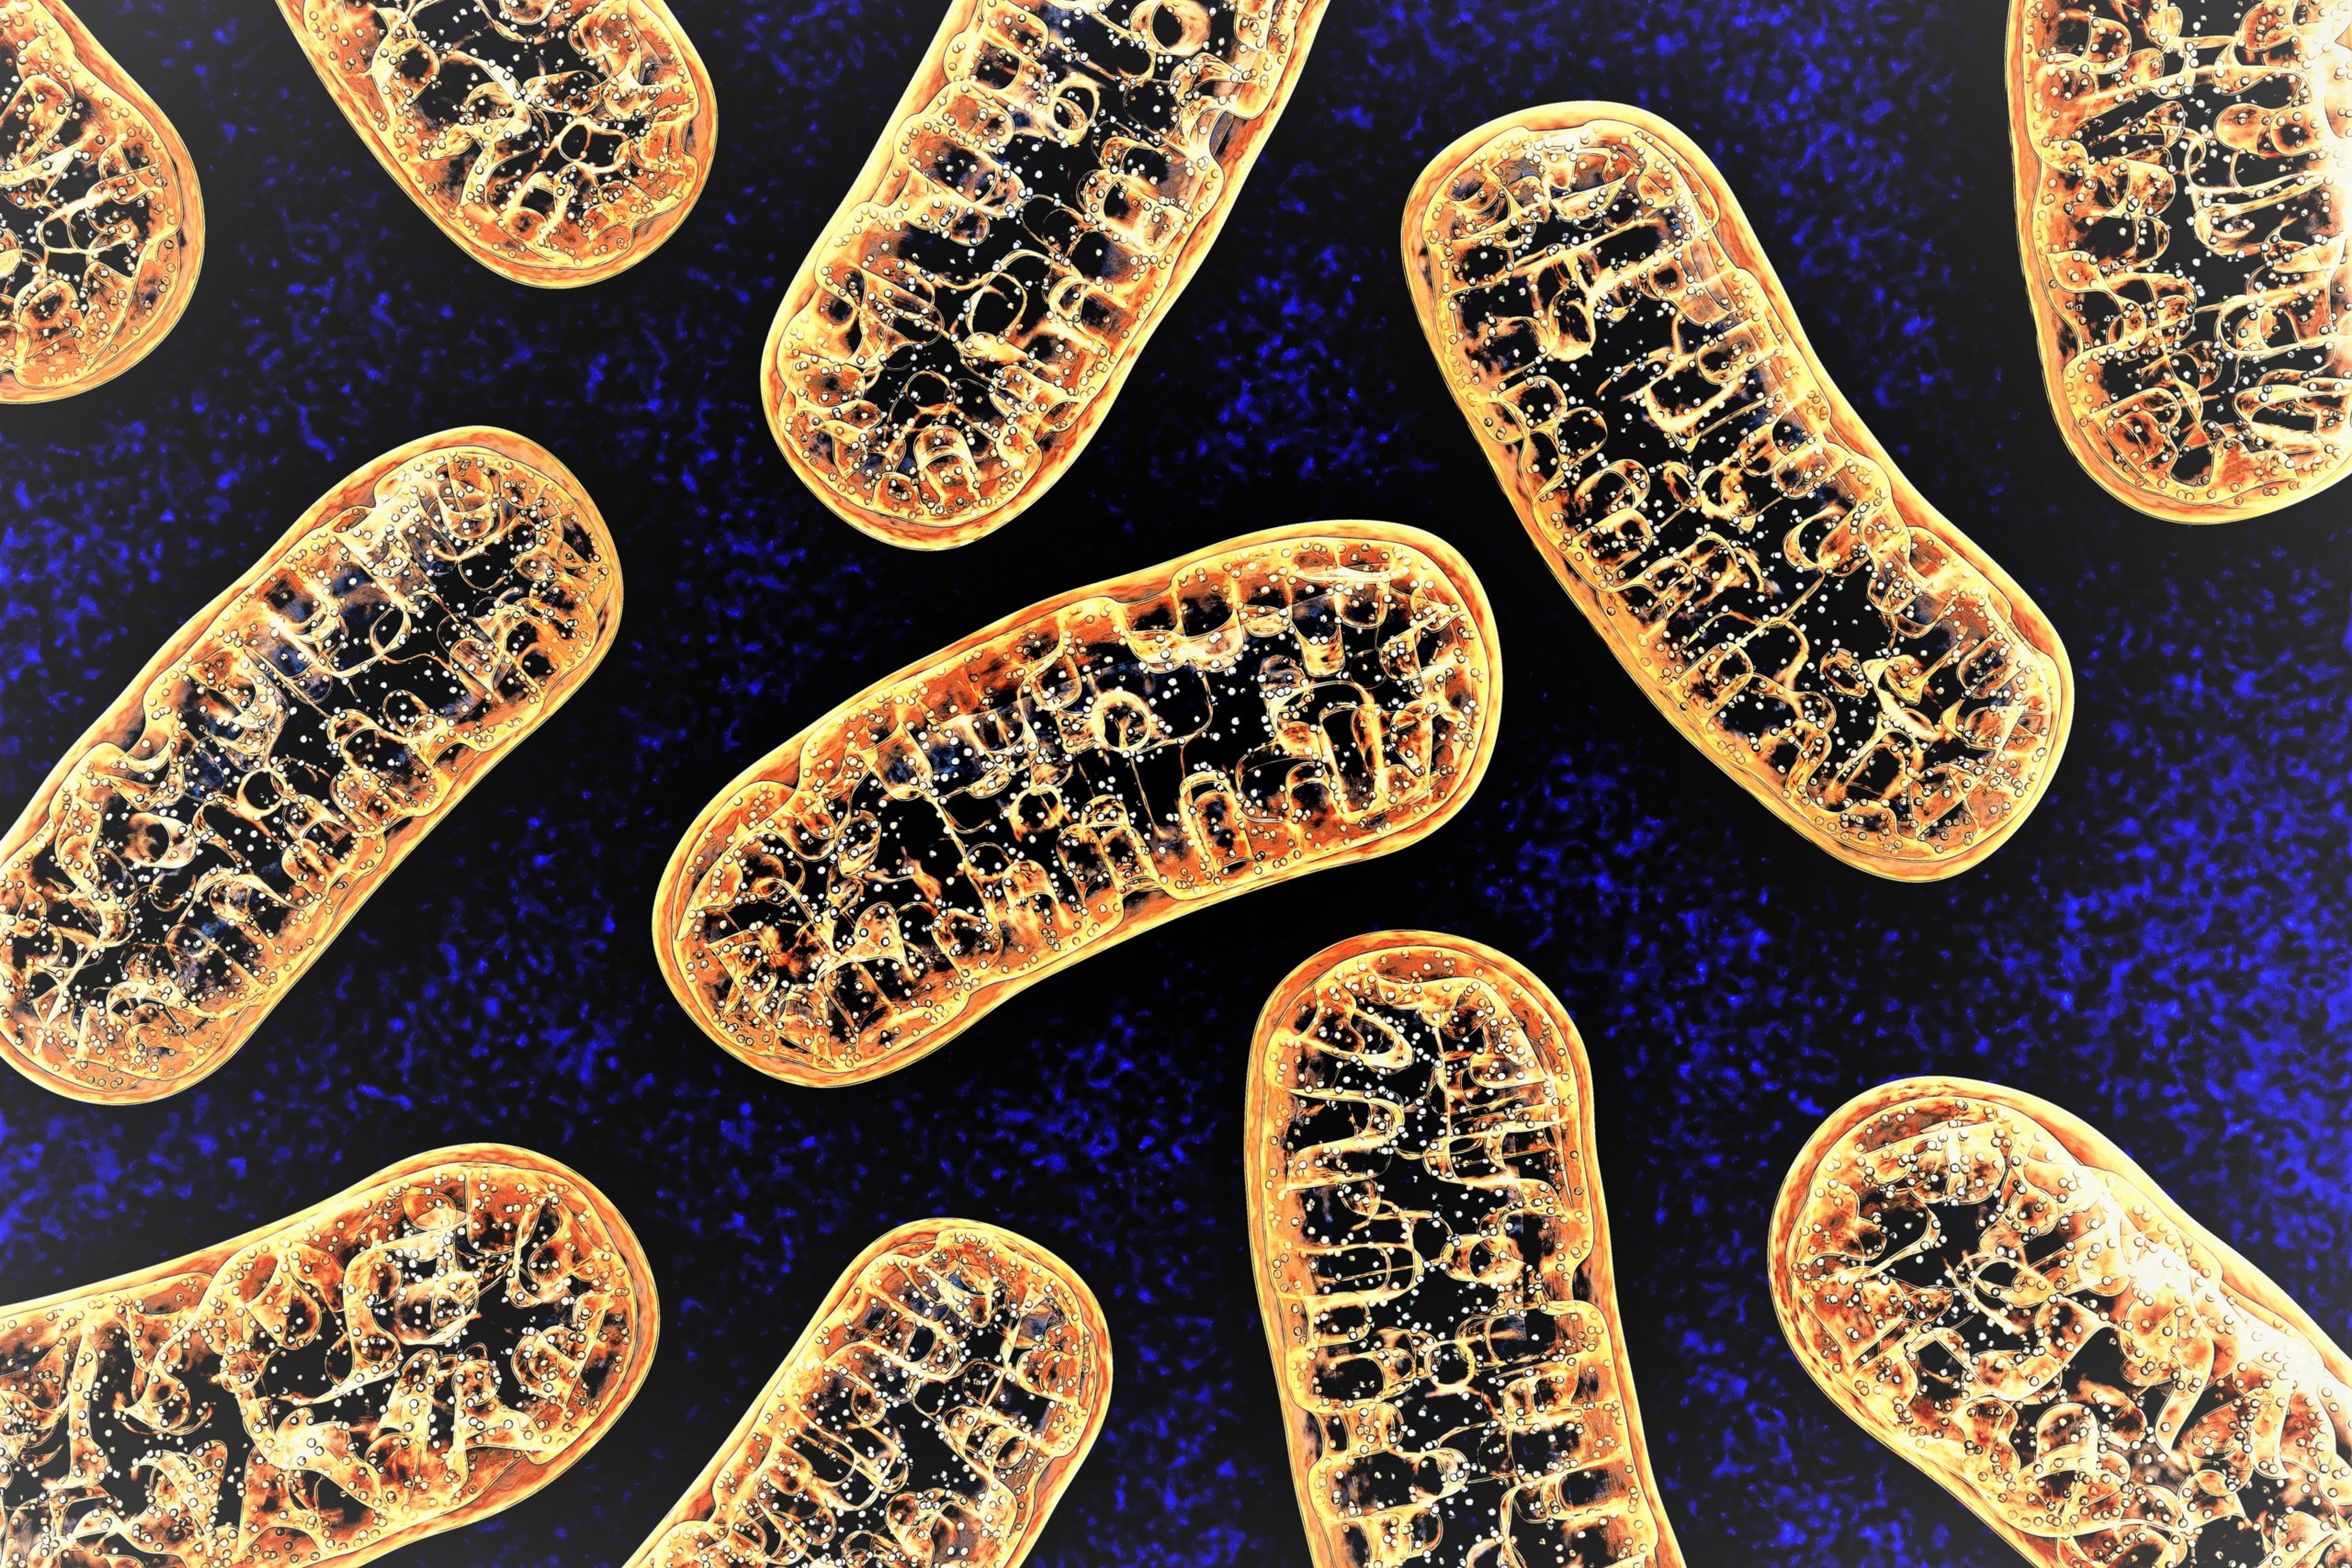 Mitochondria imagery